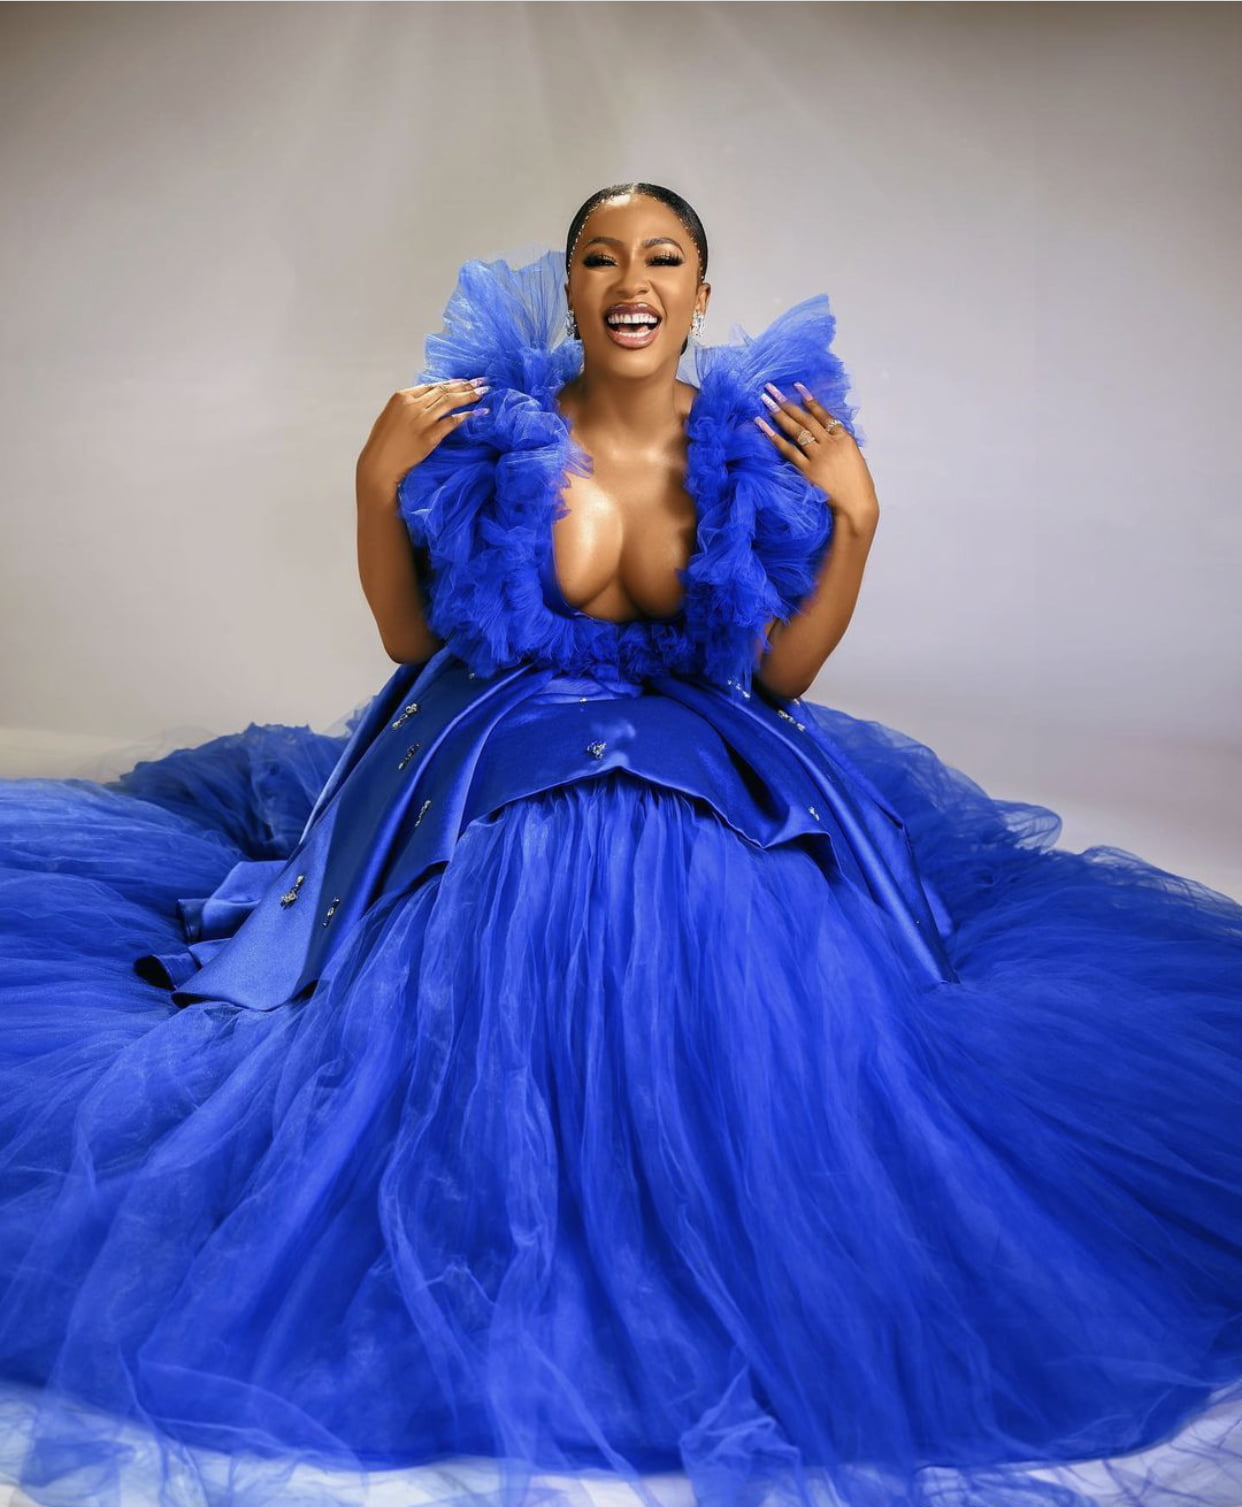 Tension as Mercy Eke receives hundreds of shoes, bags, jewelry worth millions on her birthday [video]